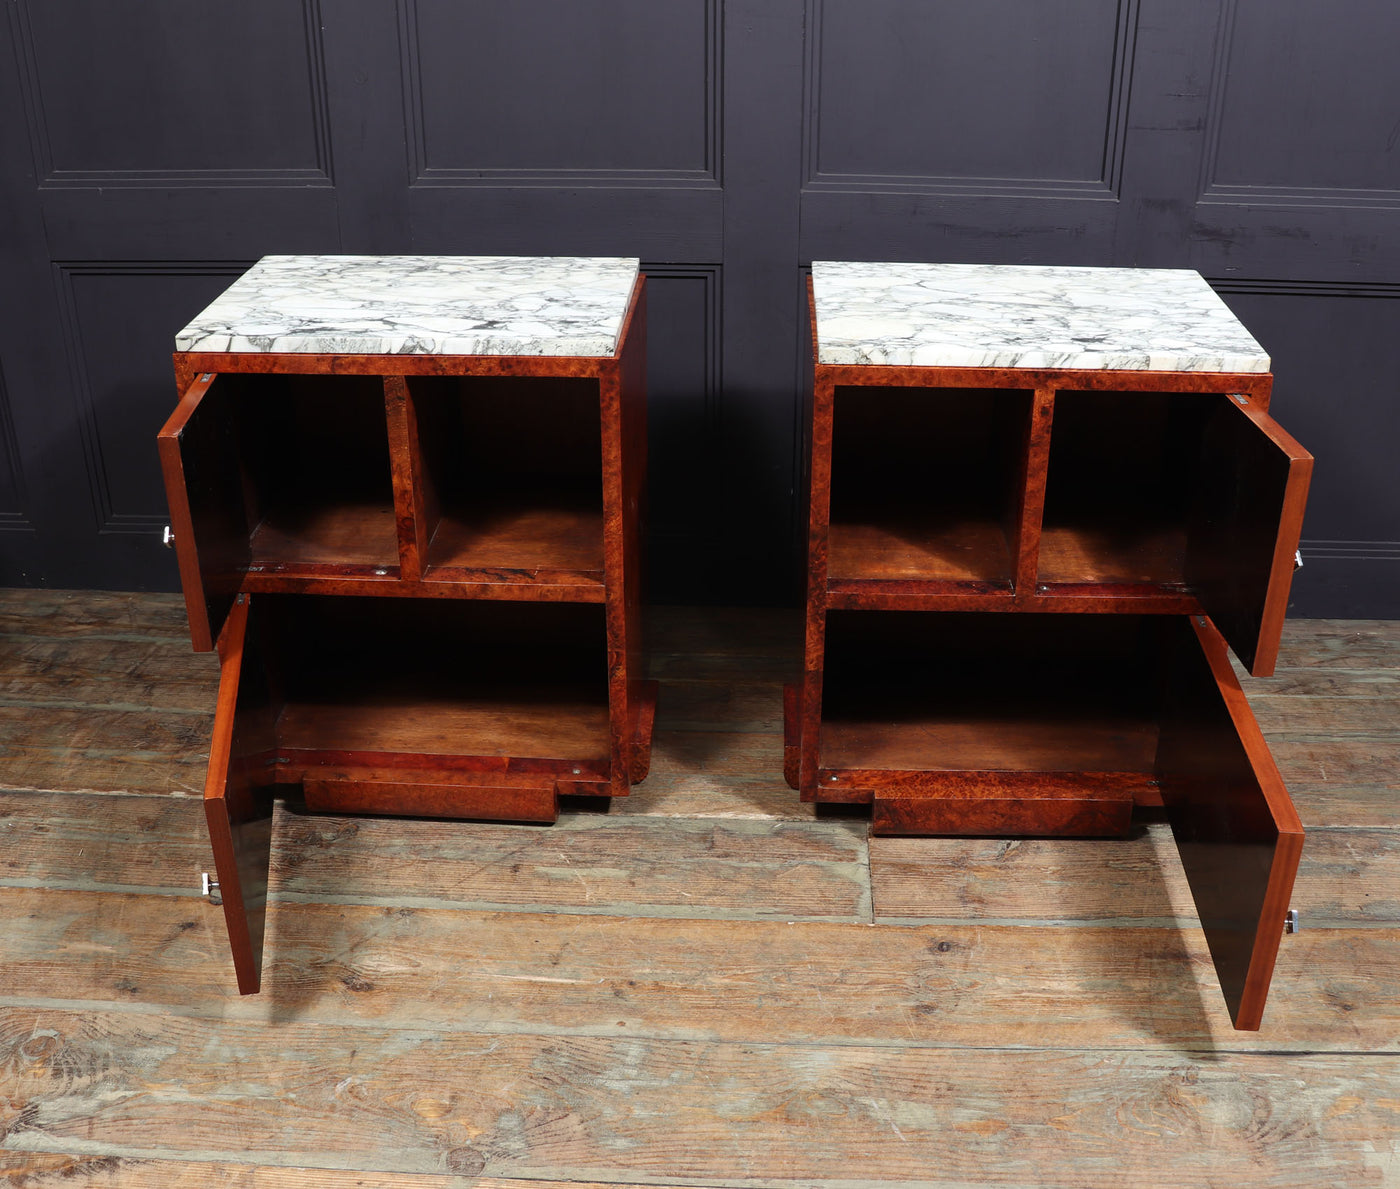 Pair of Italian Art Deco Bedside Cabinets